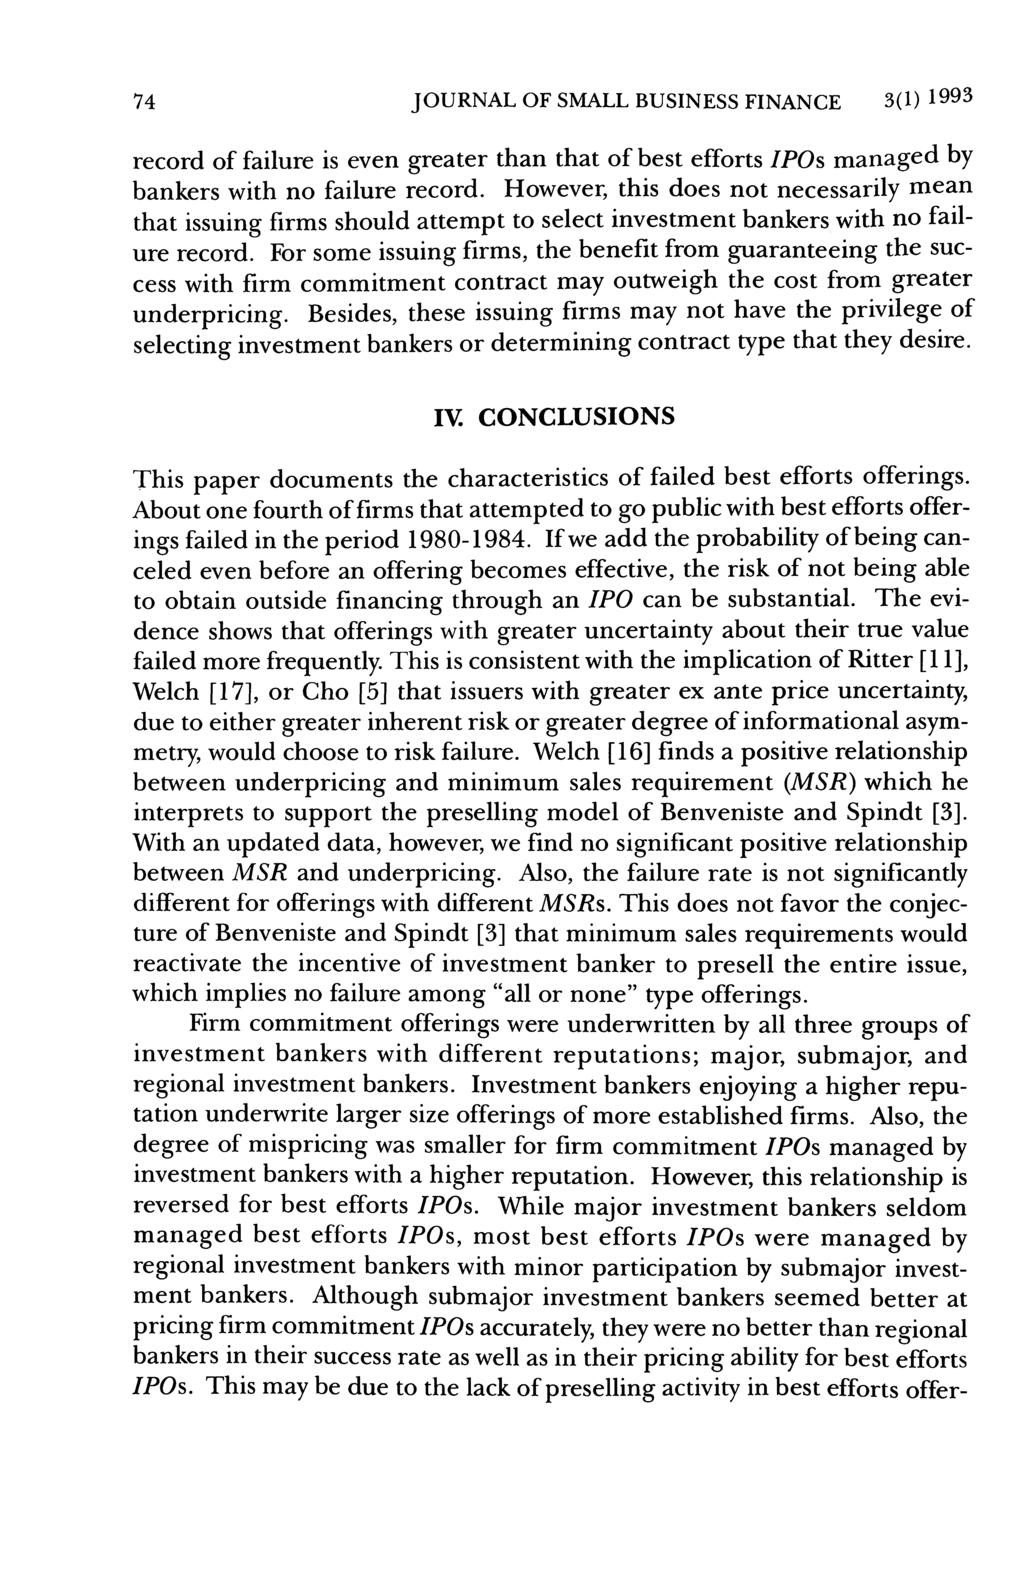 74 JOURNAL OF SMALL BUSINESS FINANCE 3(1)1993 record of failure is even greater than that of best efforts IPOs managed by bankers with no failure record.